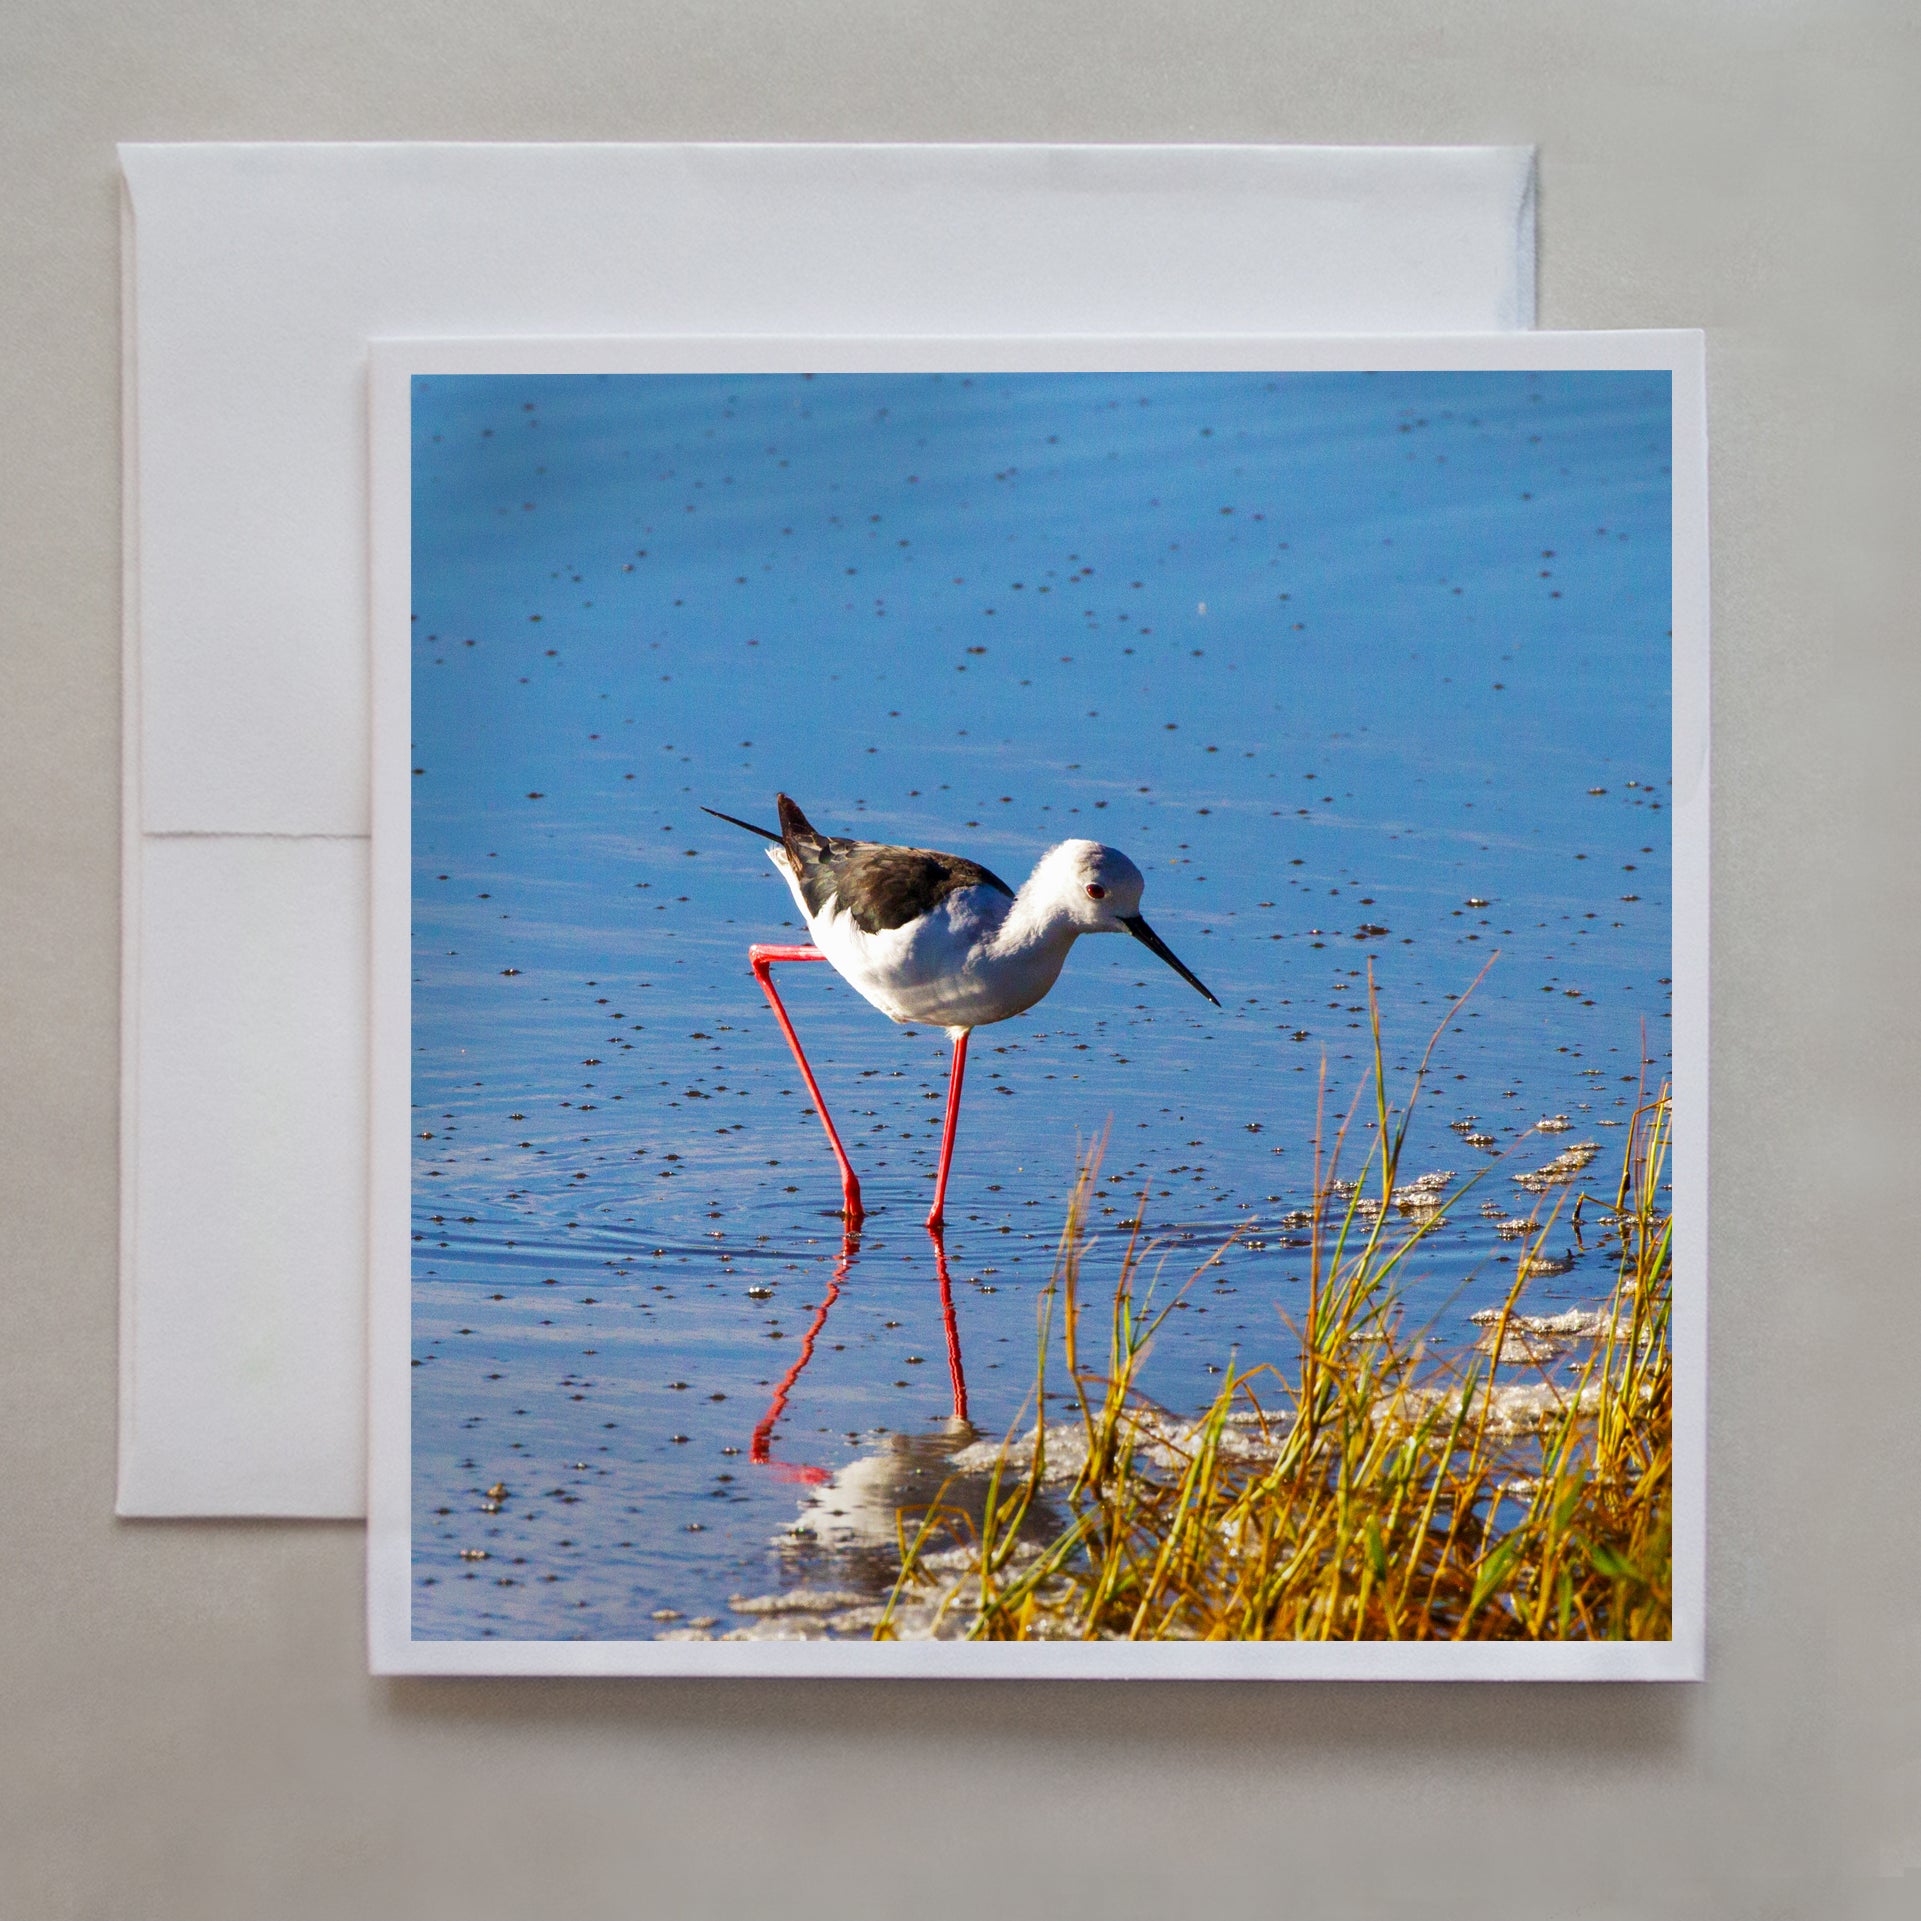 A Black-Winged Stilt bird walks cautiously in ankle deep water by photographer David R. Beatty.